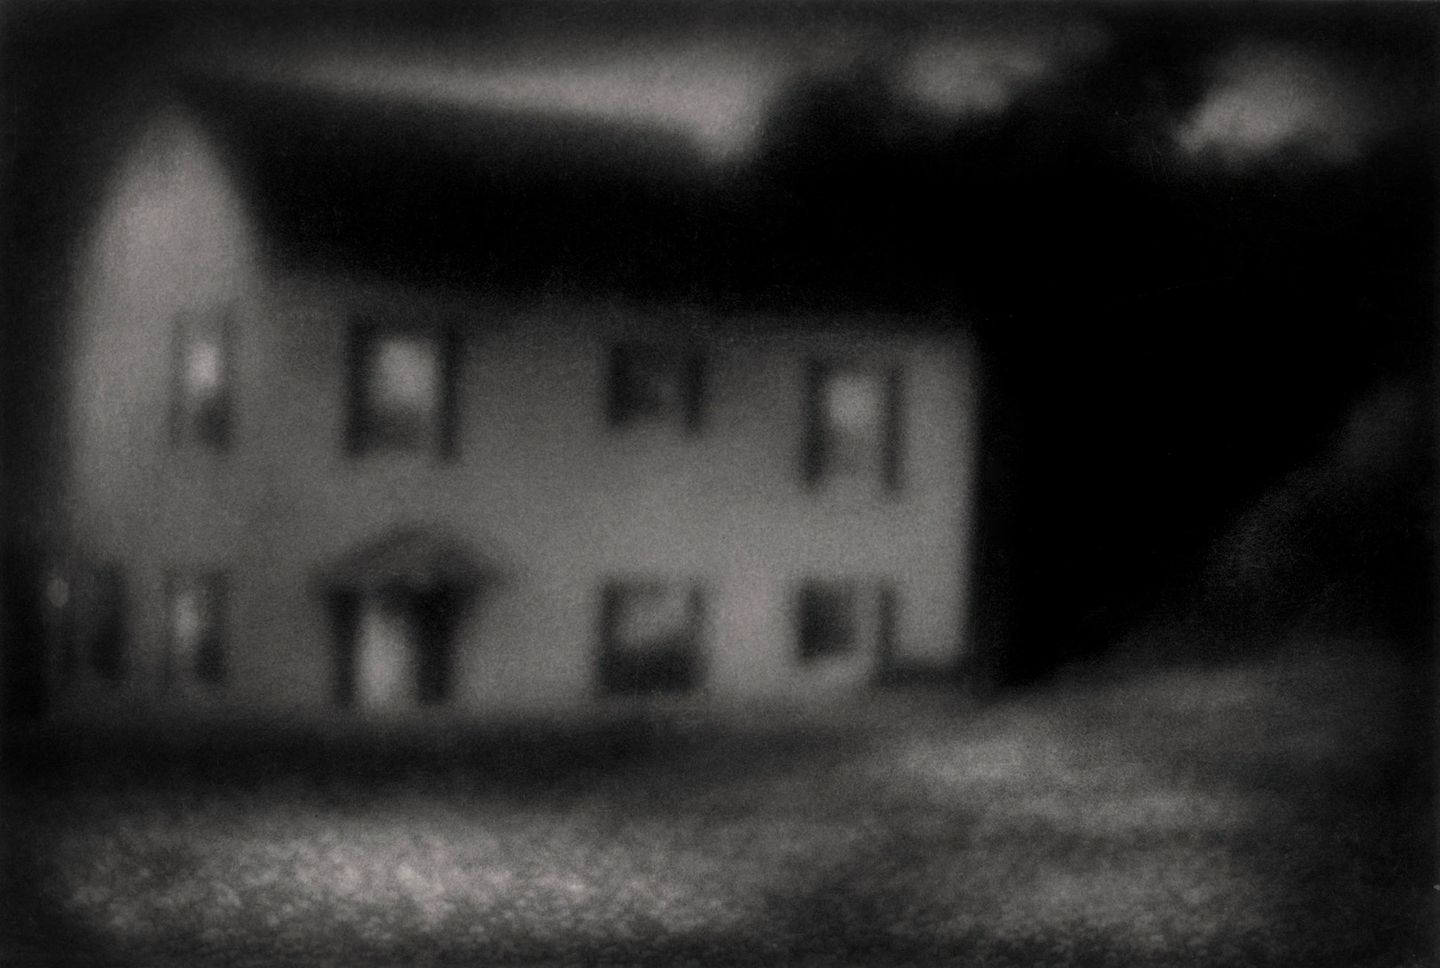 A blurry image of a house with trees in the background.